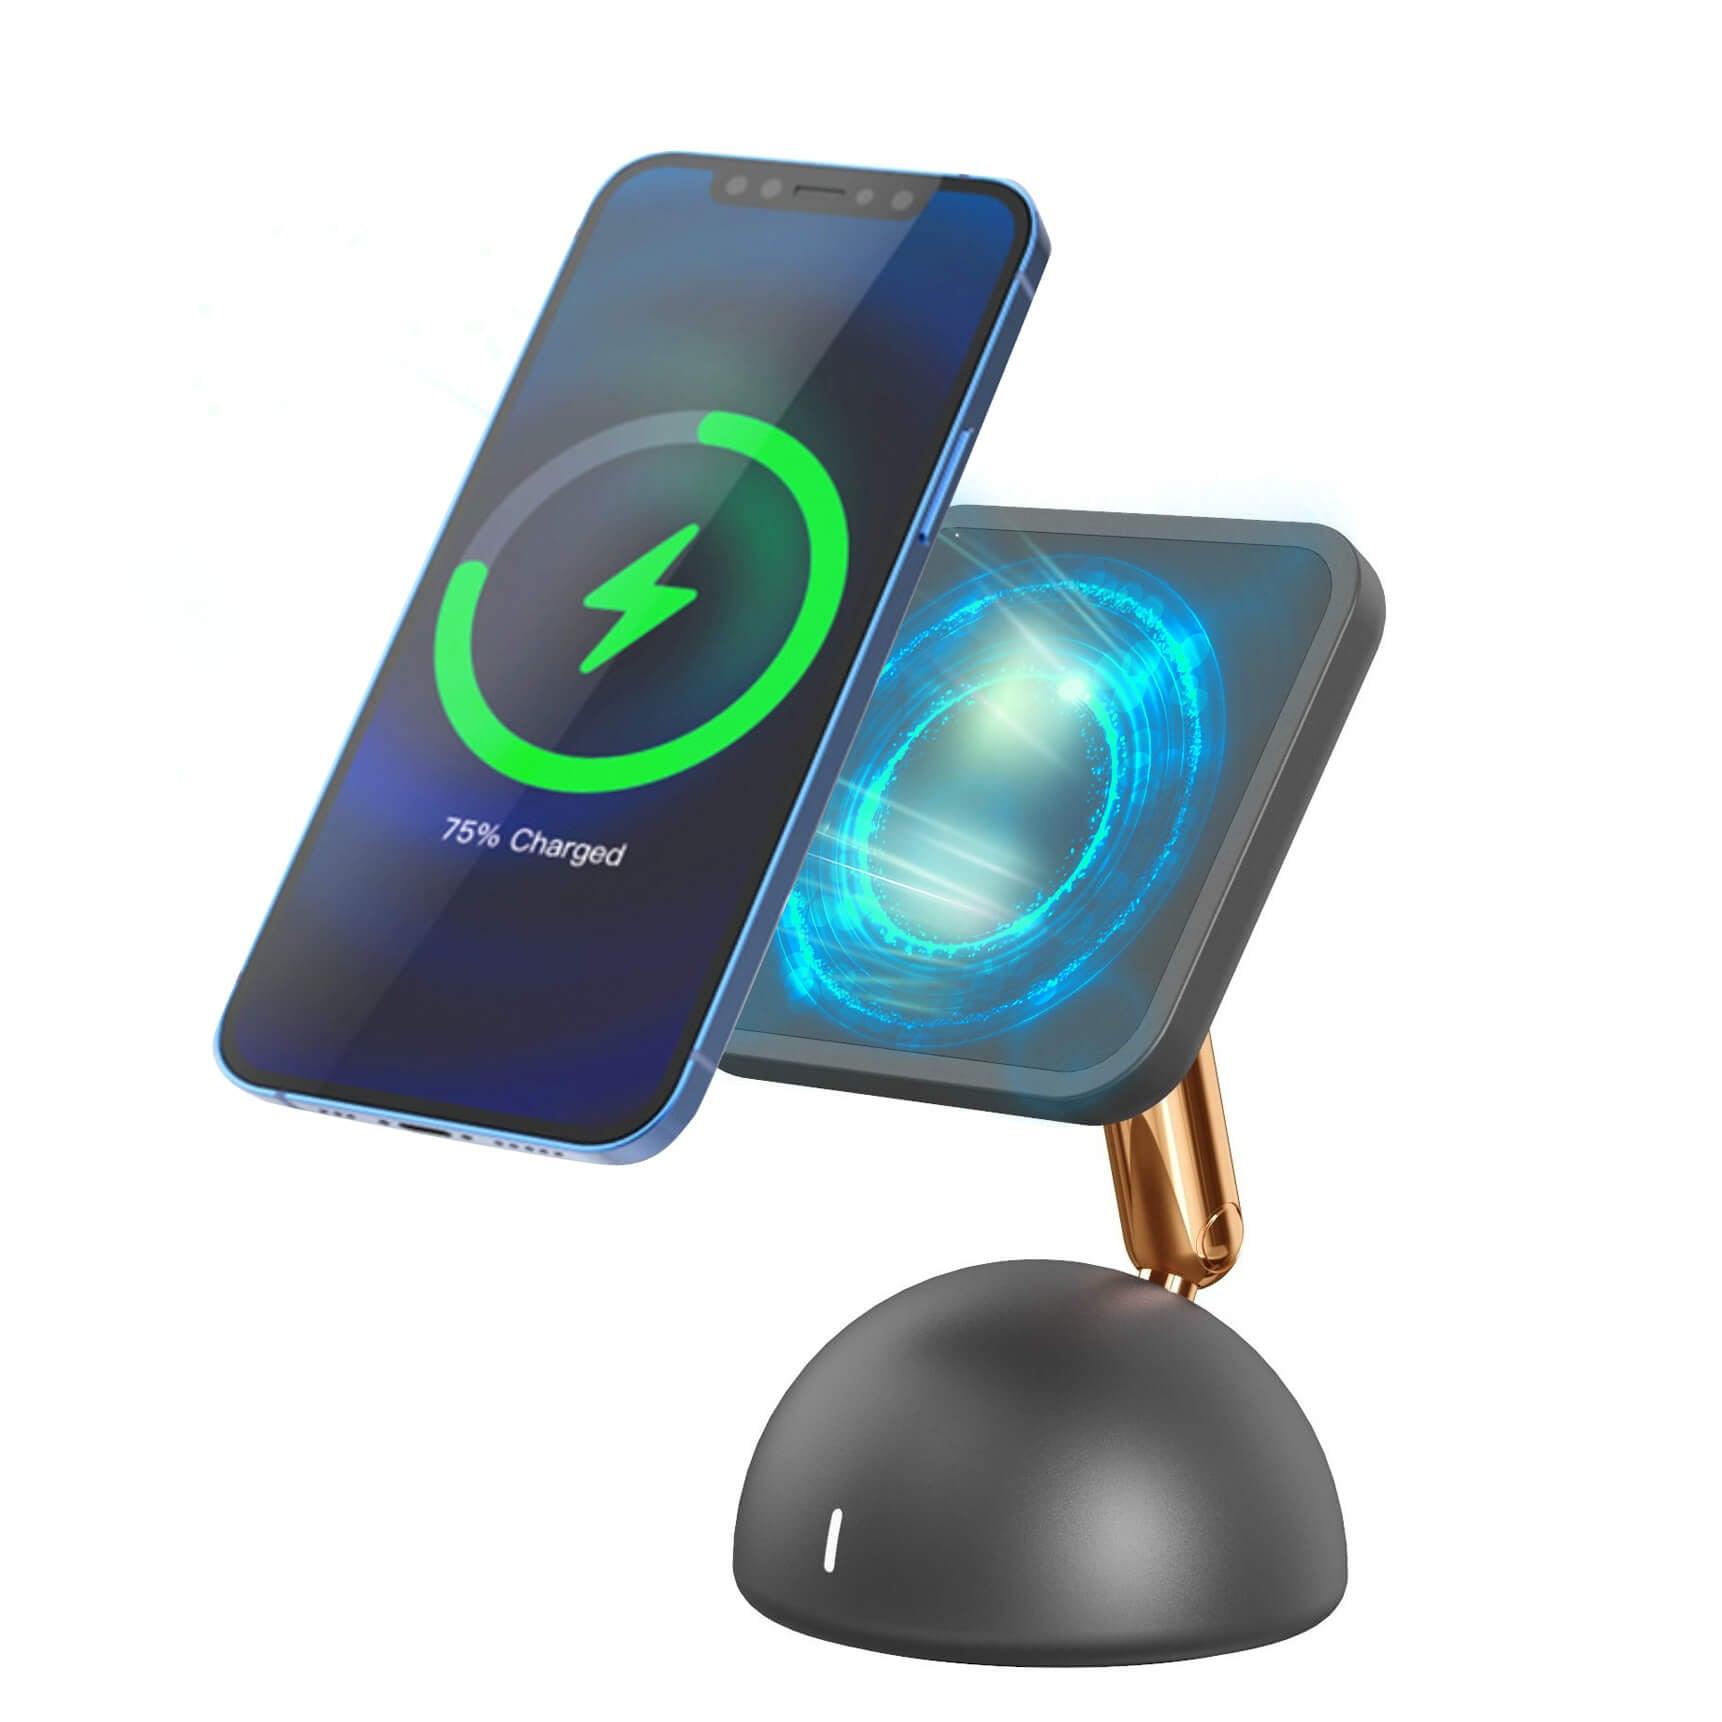 MAGFIT Wireless Charger For iPhone 13/12 with Retro iMAC G4 Style - Magfit